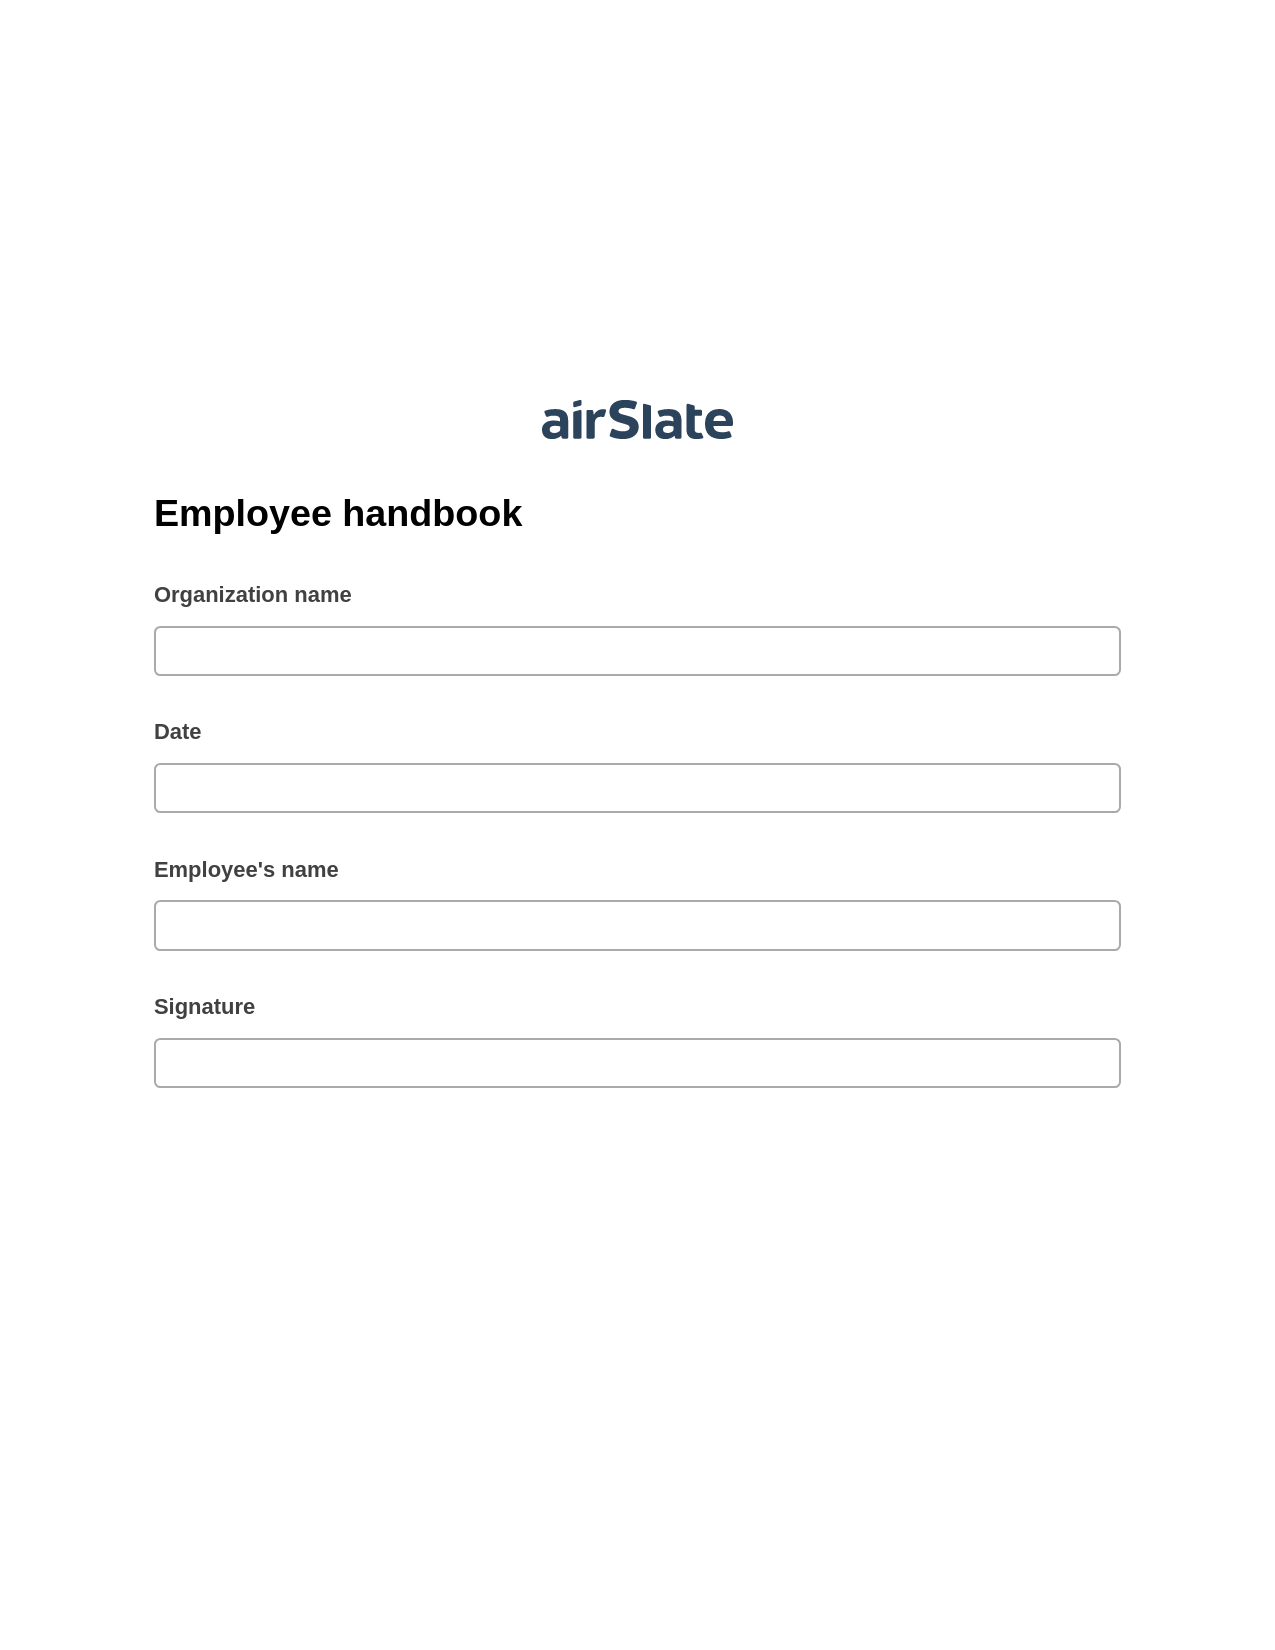 Employee handbook Pre-fill Slate from MS Dynamics 365 Records Bot, Create slate from another Flow Bot, Dropbox Bot